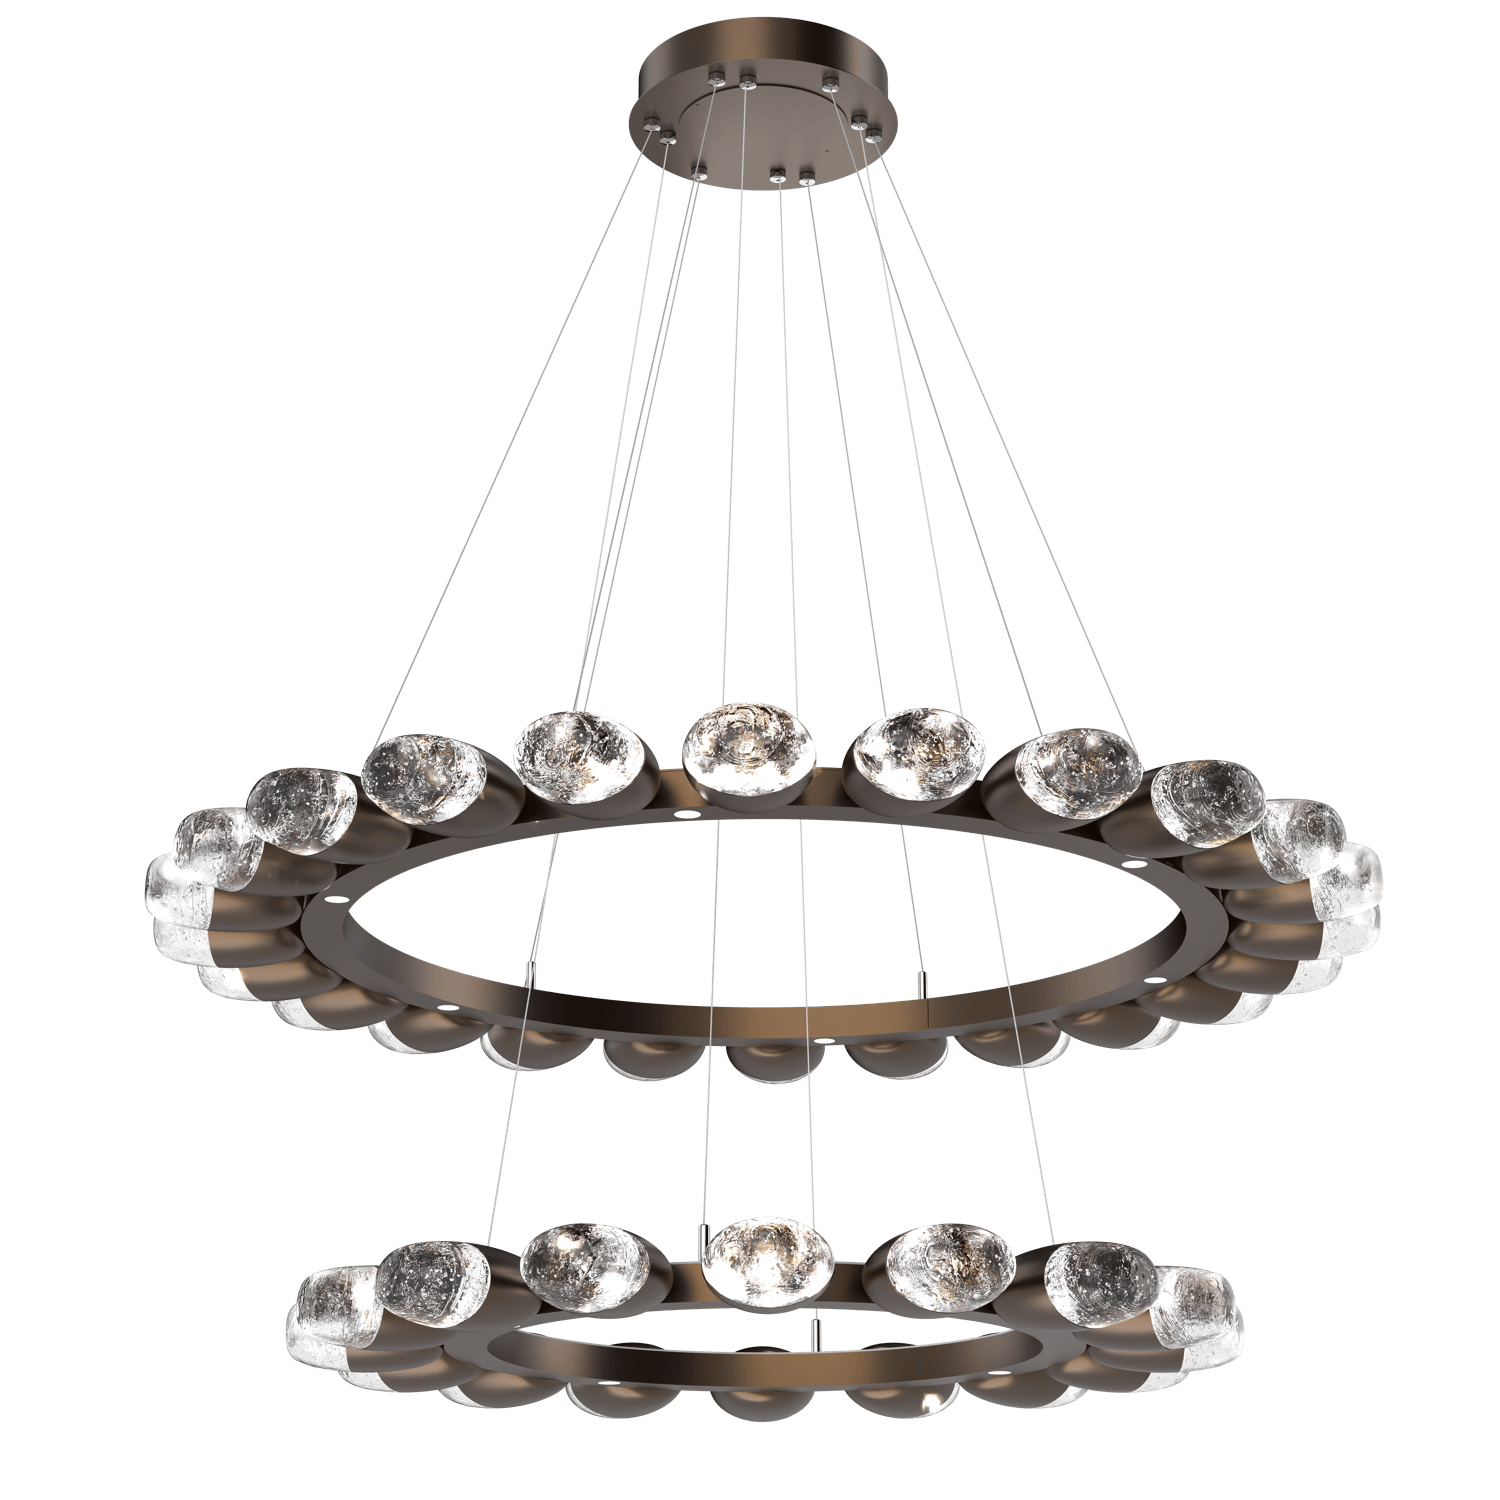 CHB0079-2T-FB-Hammerton-Studio-Pebble-48-inch-two-tier-radial-ring-chandelier-with-flat-bronze-finish-and-clear-cast-glass-shades-and-LED-lamping